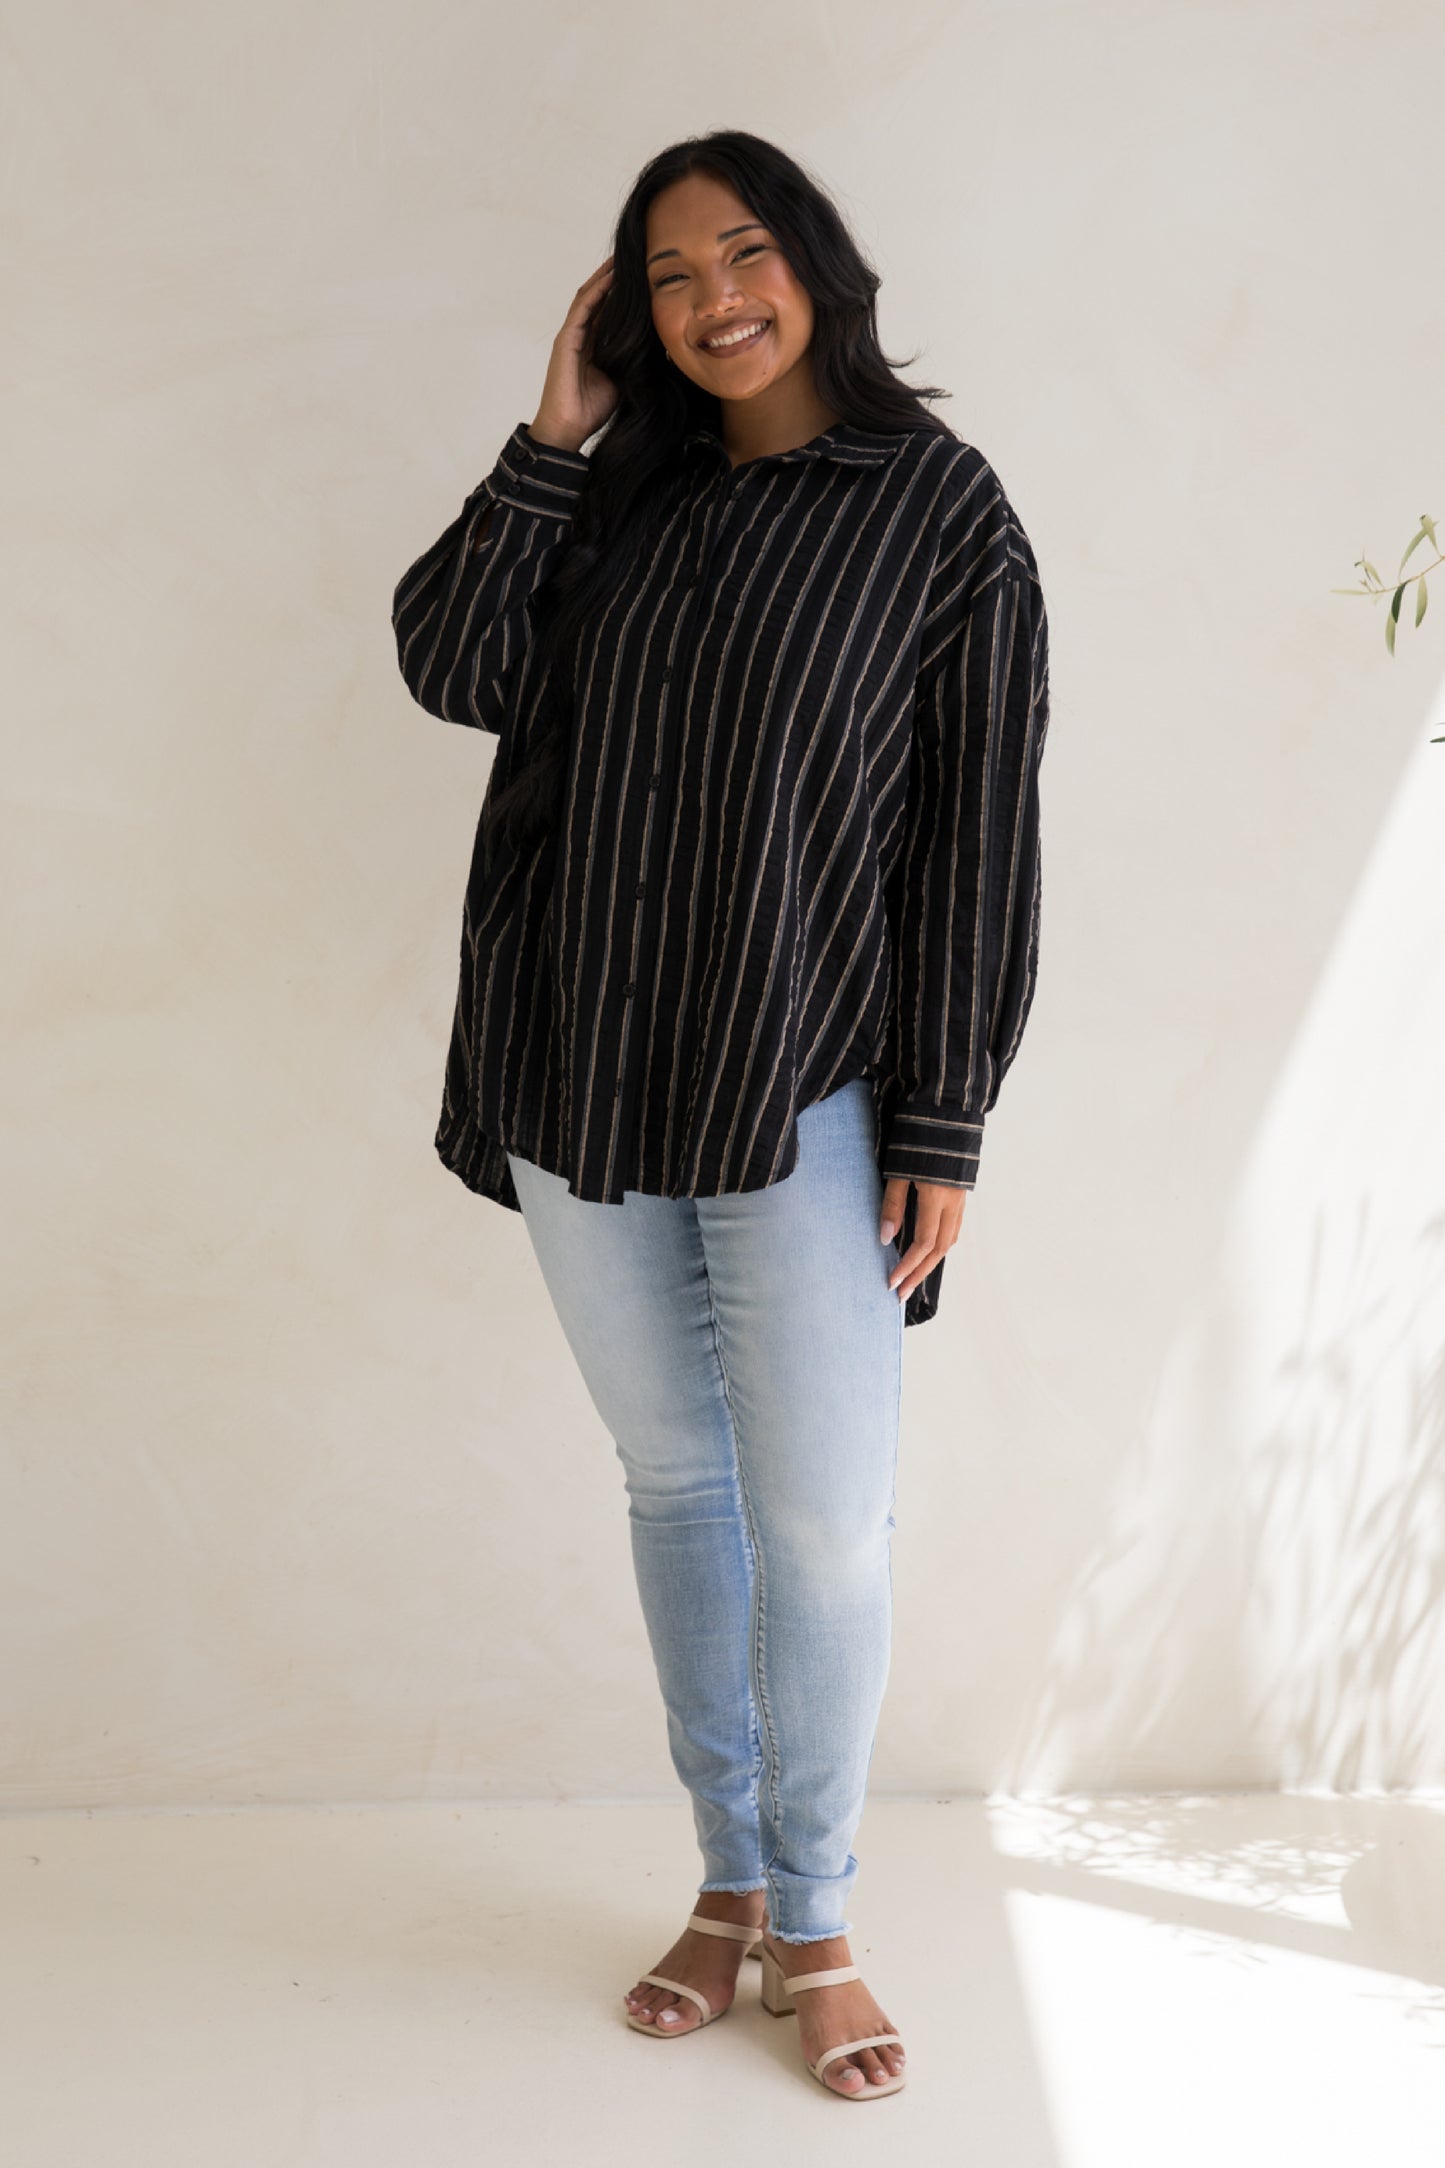 Amore Shirt in Black and Beige Stripe